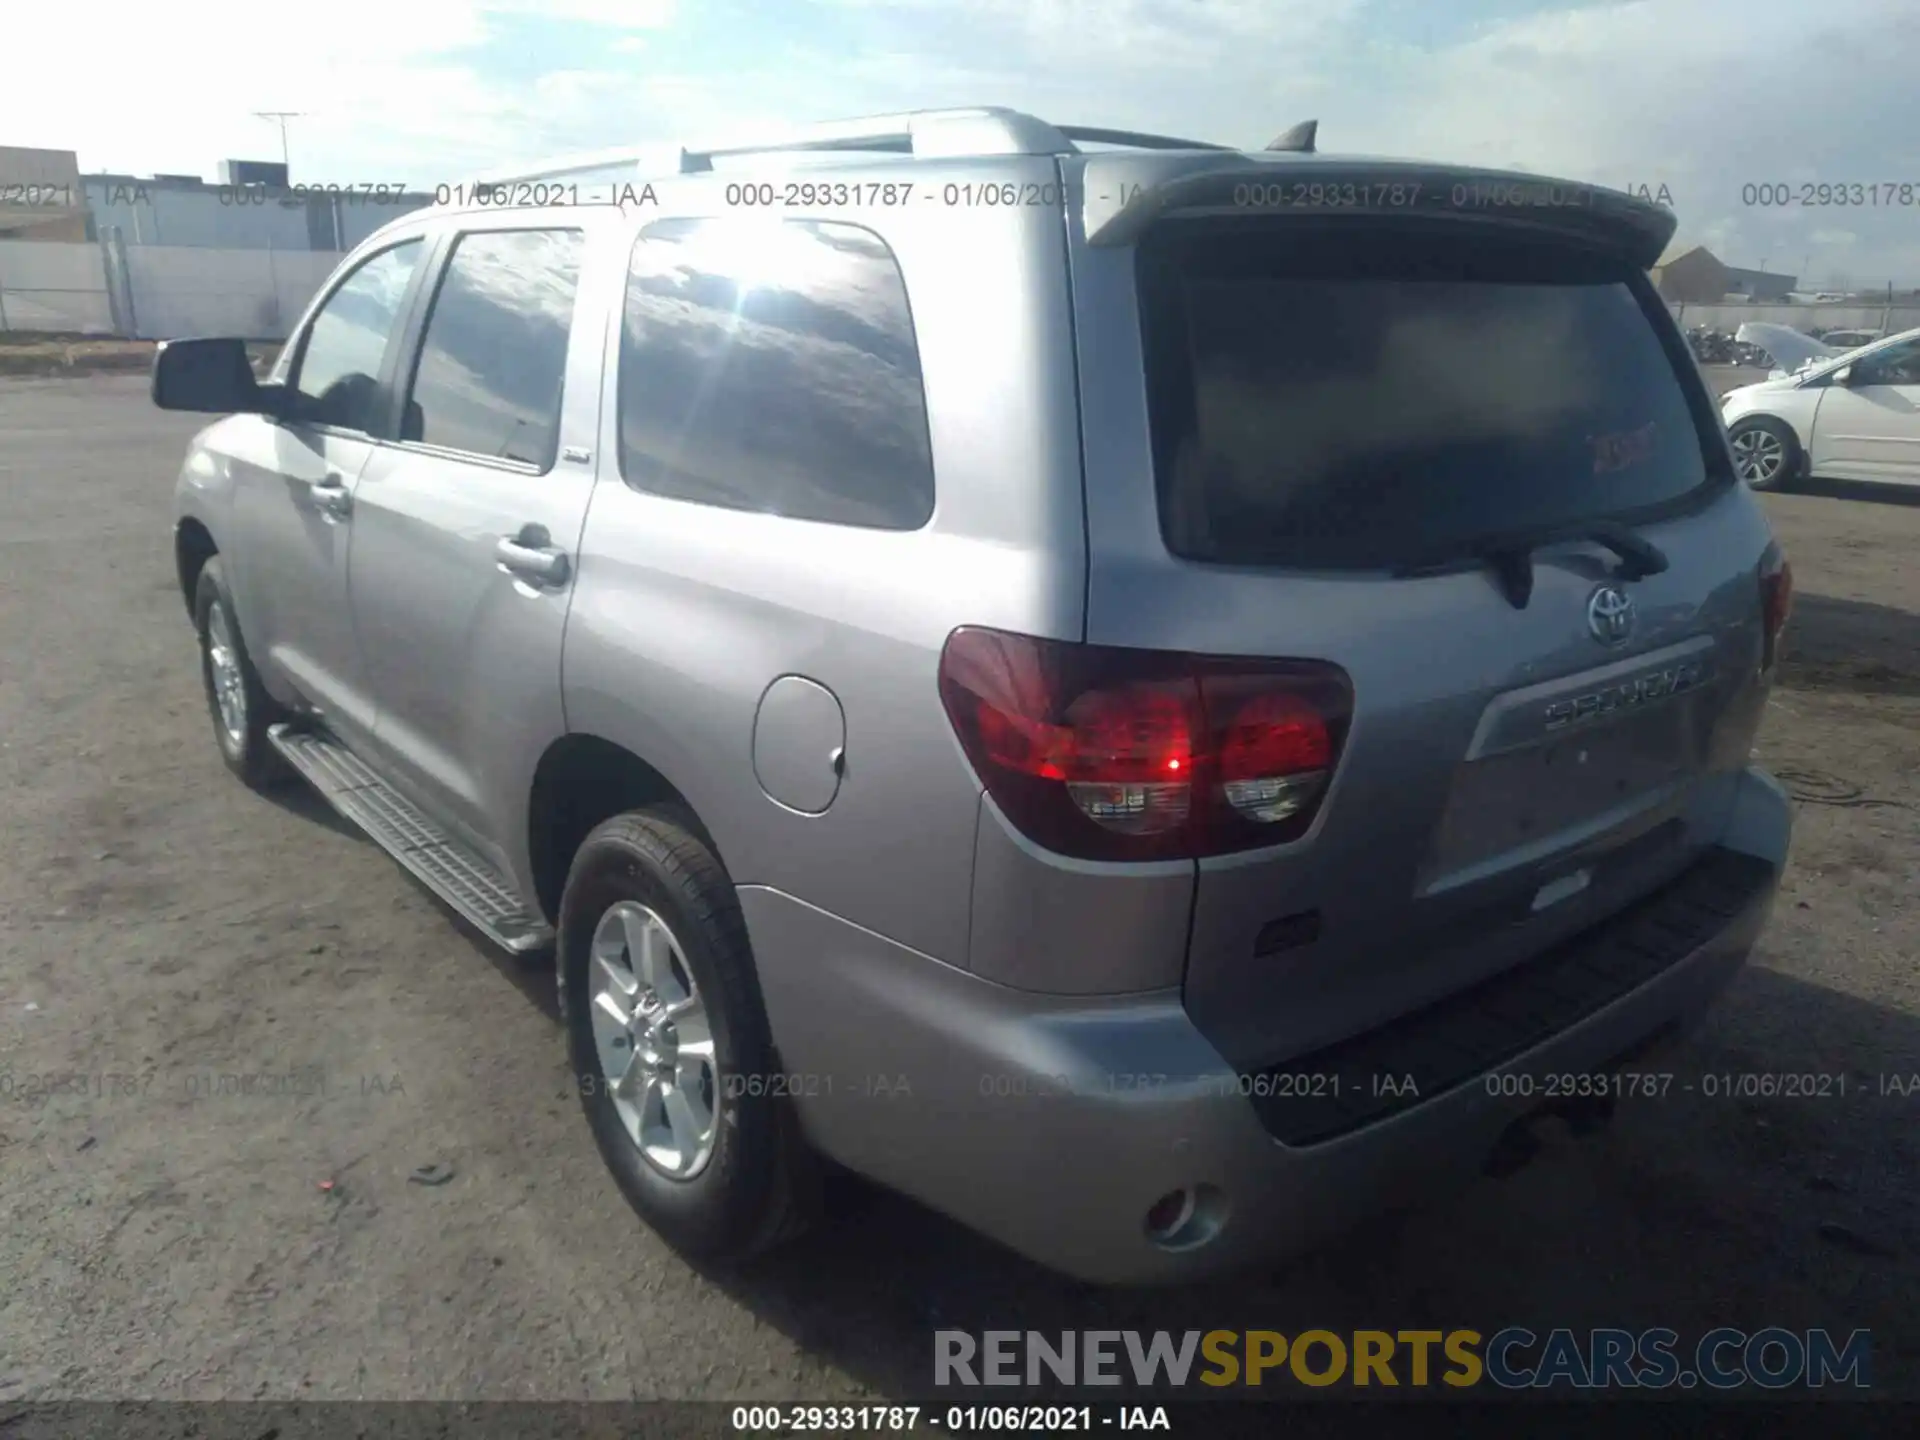 3 Photograph of a damaged car 5TDBY5G19KS166580 TOYOTA SEQUOIA 2019